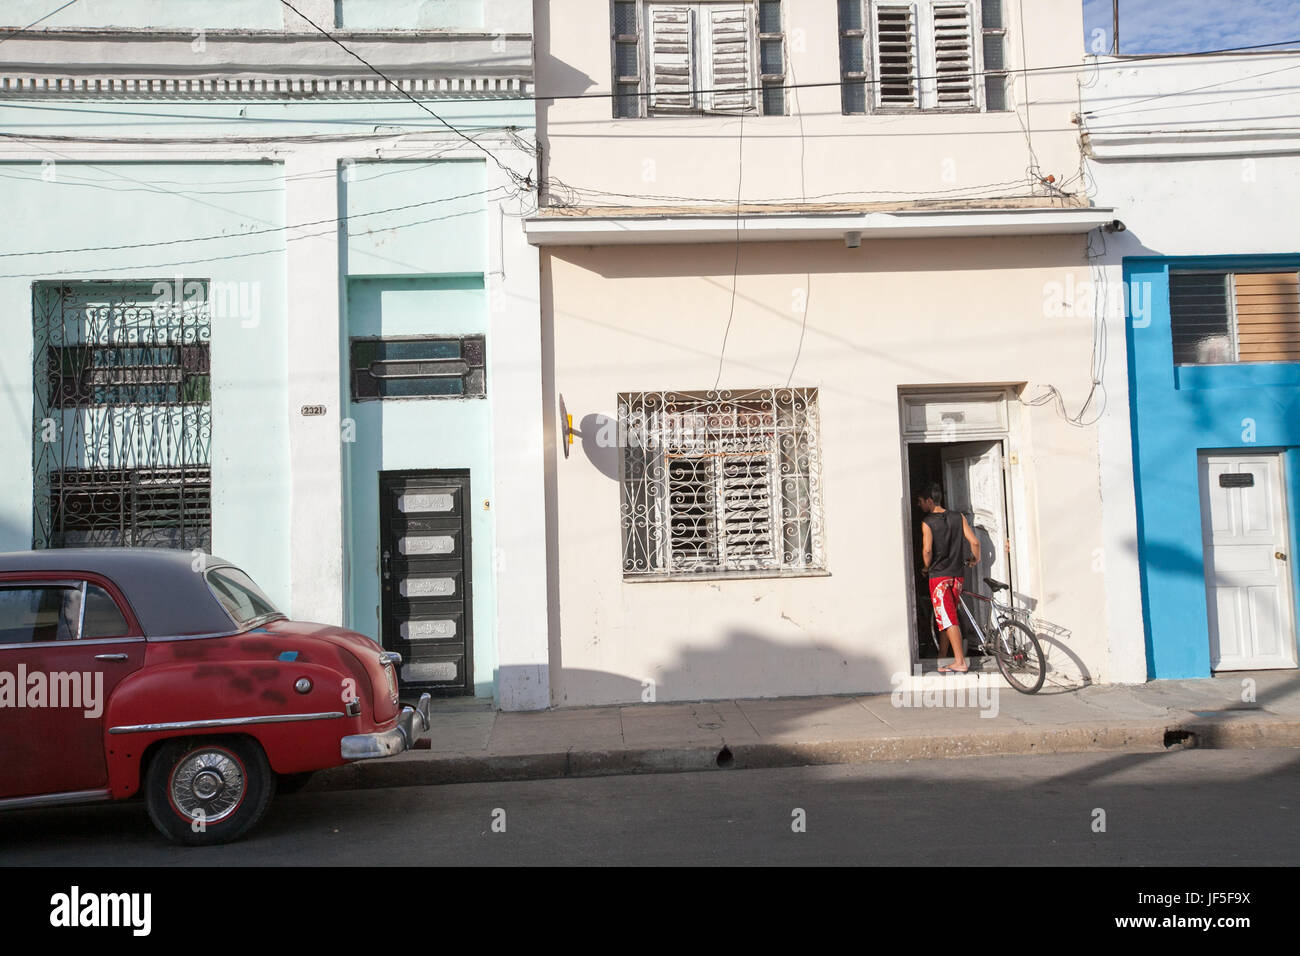 Near a classic American car, a young man walks his bicycle into his home on the streets of Cienfuegos. Stock Photo